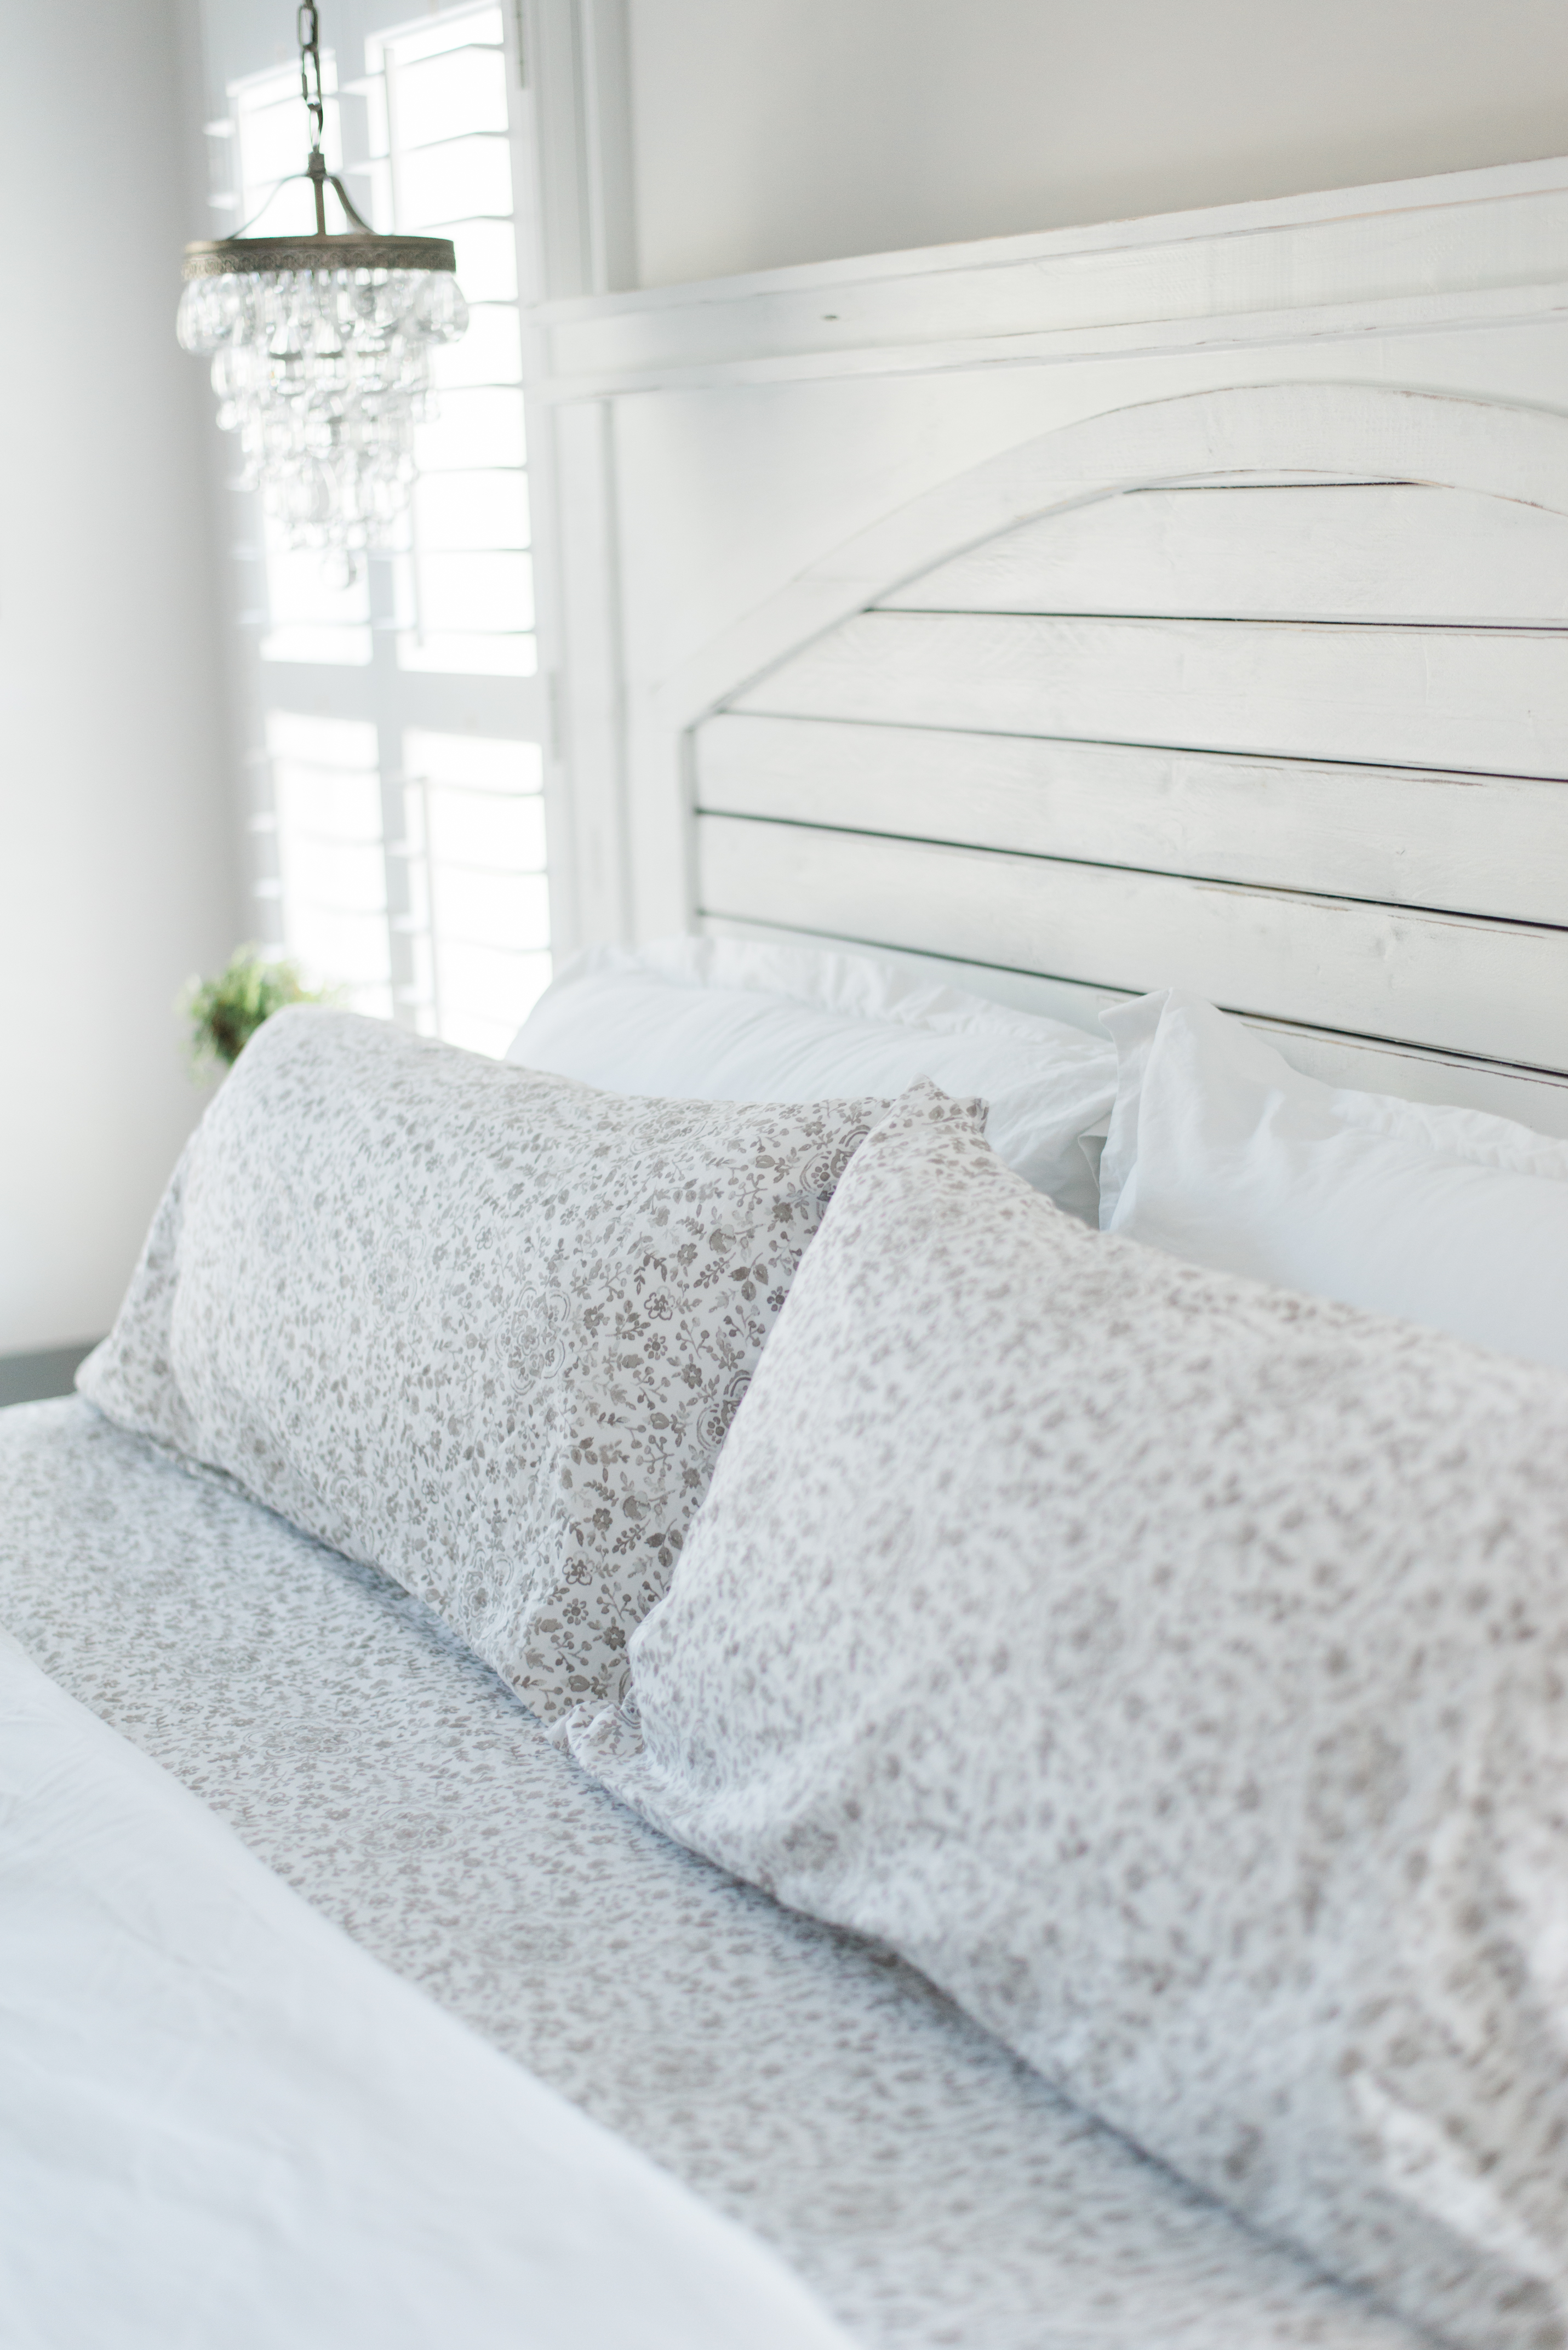 Bookmark this post for the perfect master bedroom reveal thanks to Motherhood and Lifestyle blogger Meghan Basinger. Master Bedroom Inspiration - Master Bedroom Reveal 